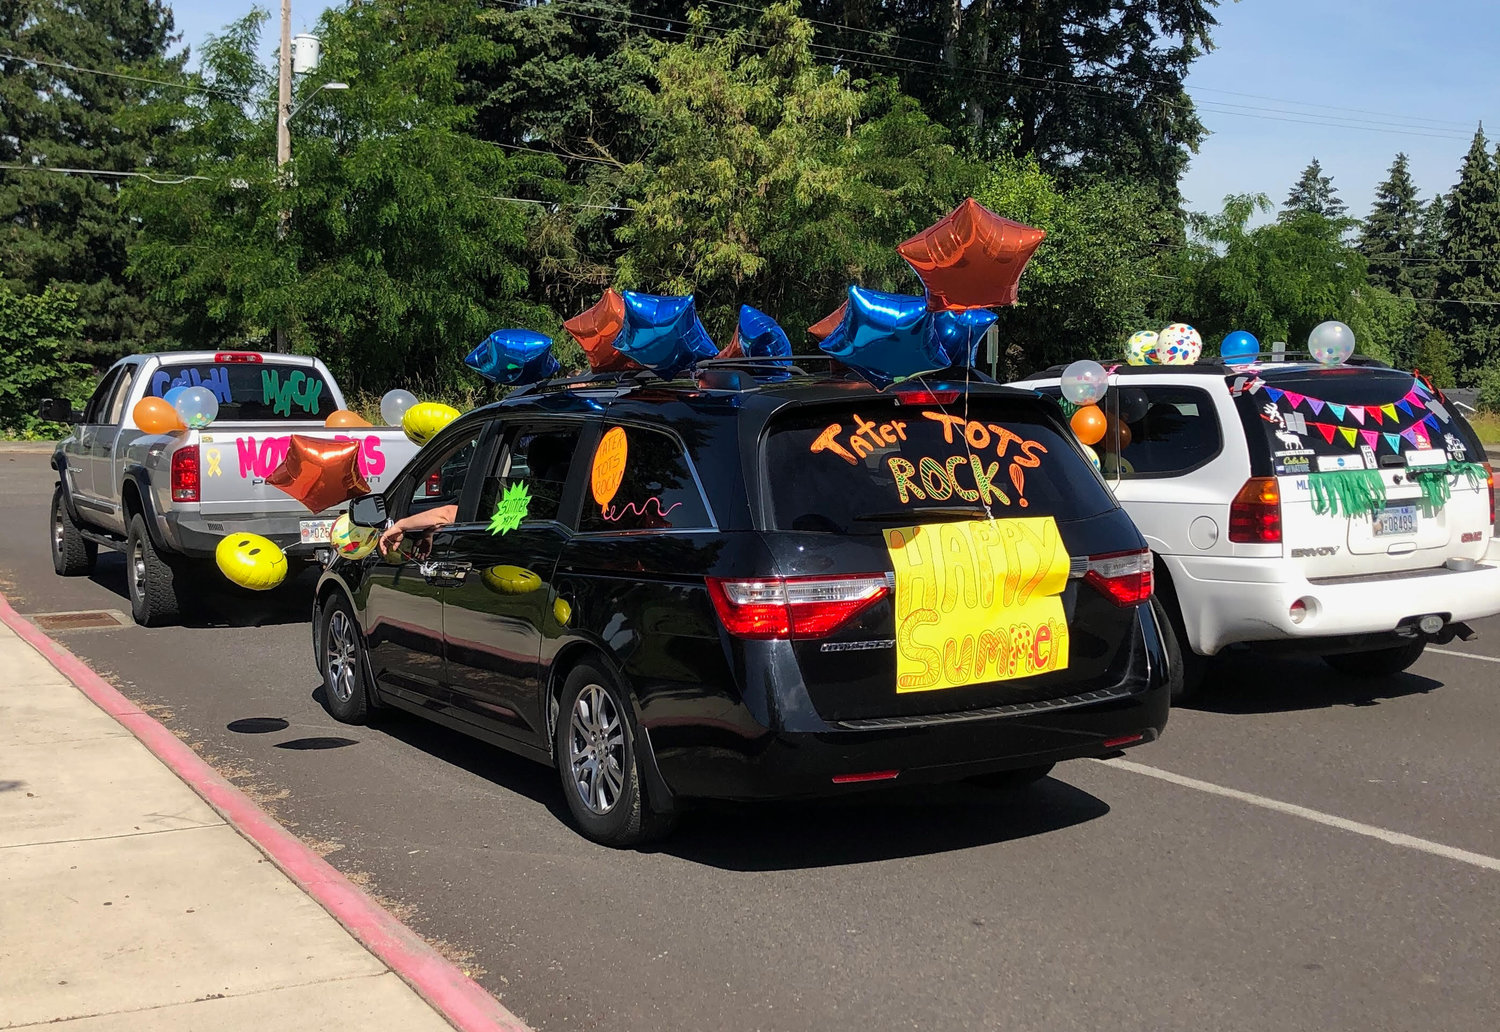 Union Ridge Elementary School teachers decorated their cars with signs and balloons for a car parade to mark the end of the school year. 